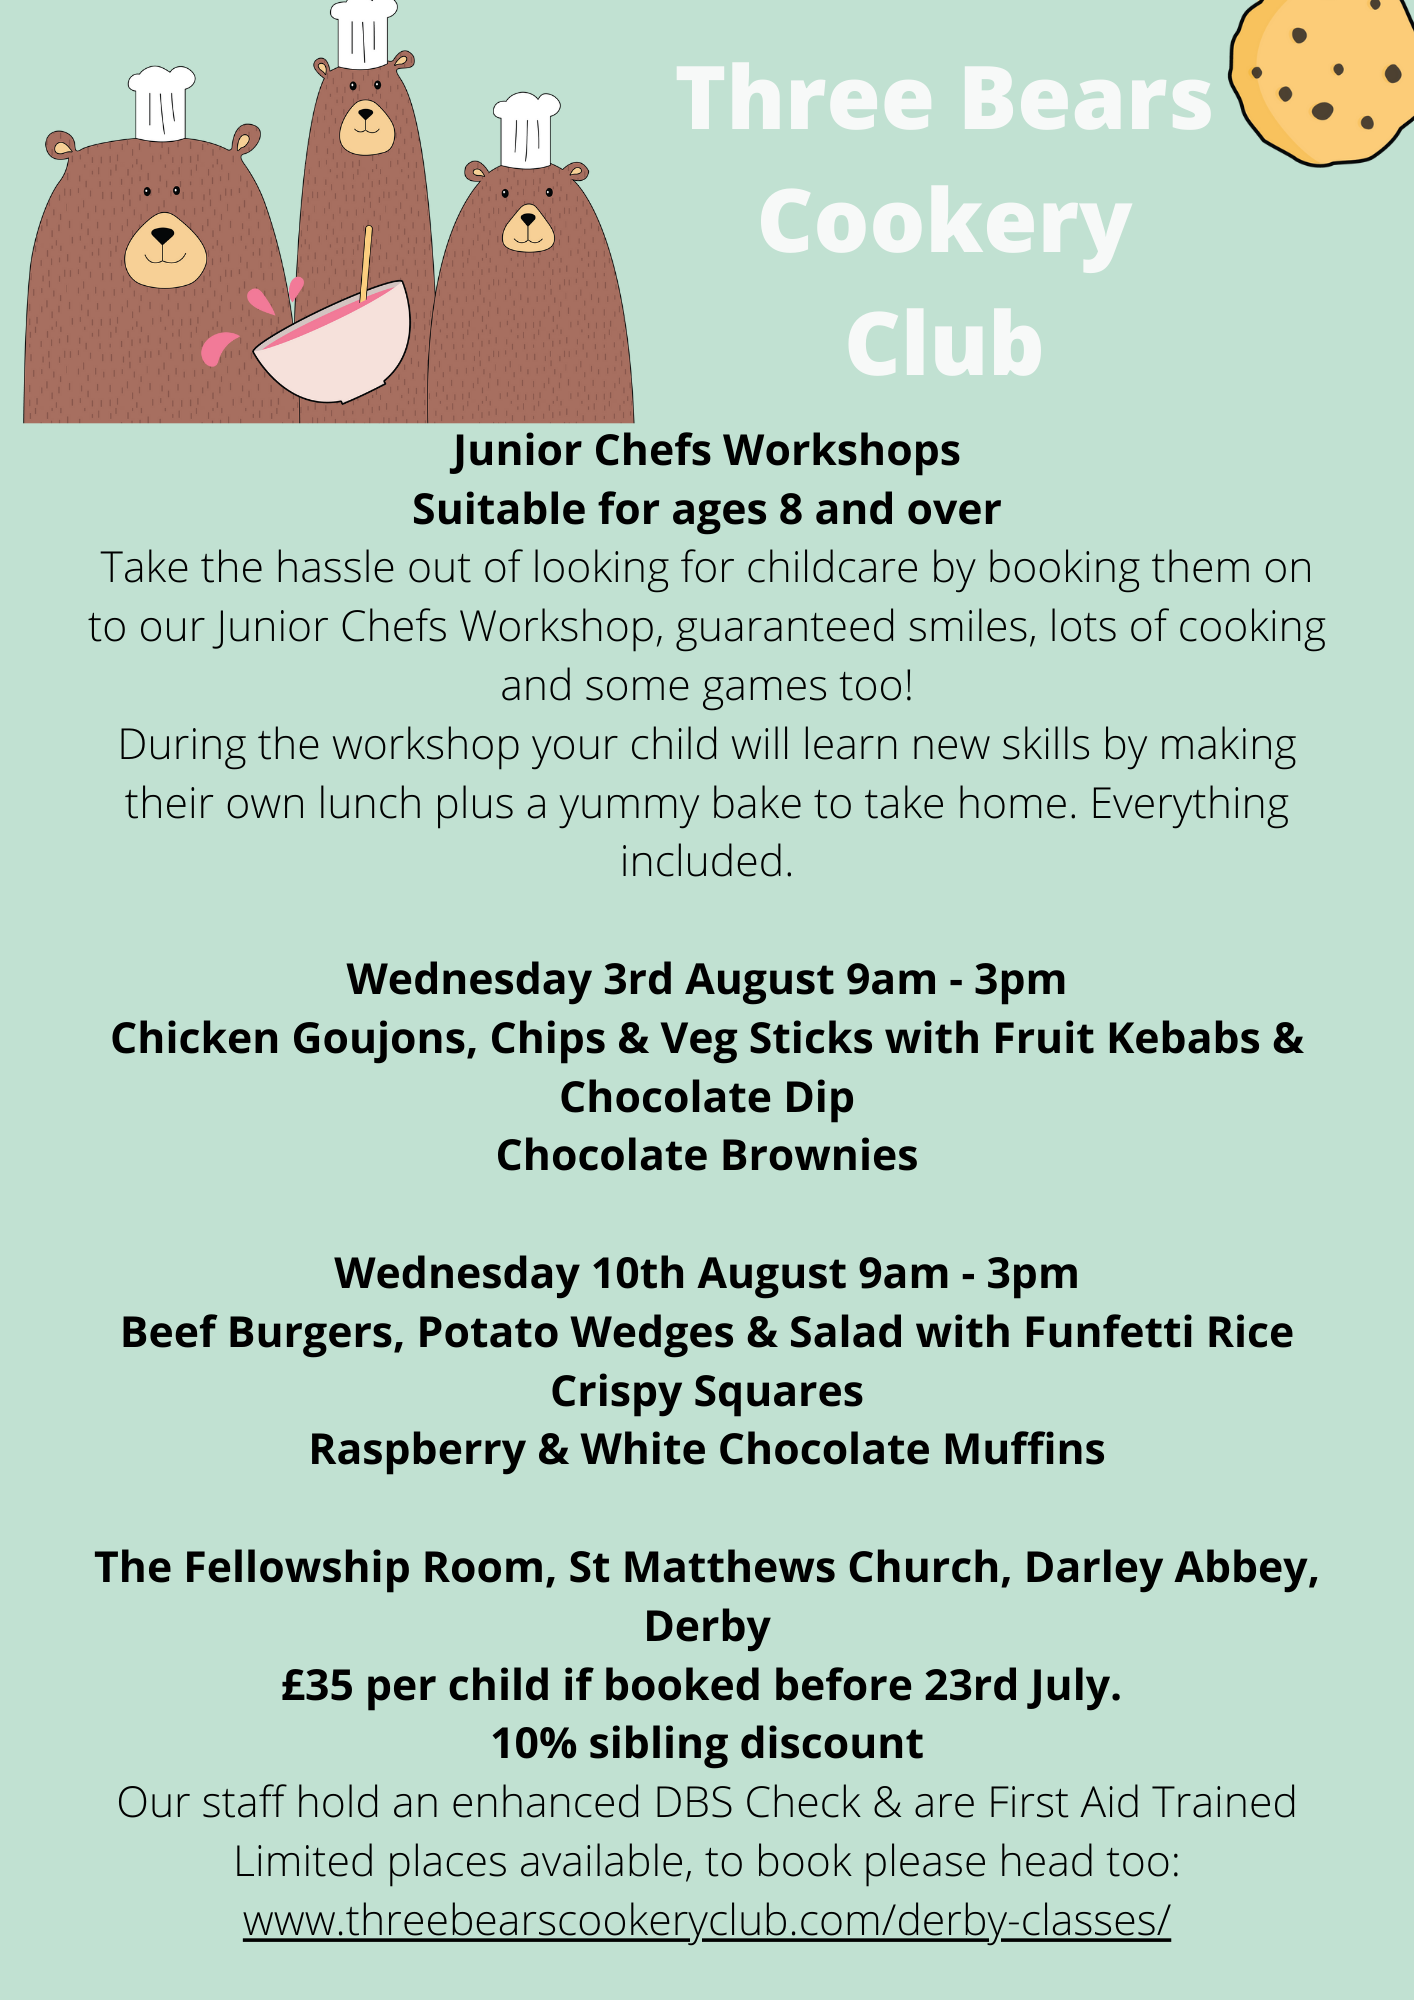 Three Bears Cookery - Junior Chefs Workshops - Derby Days Out